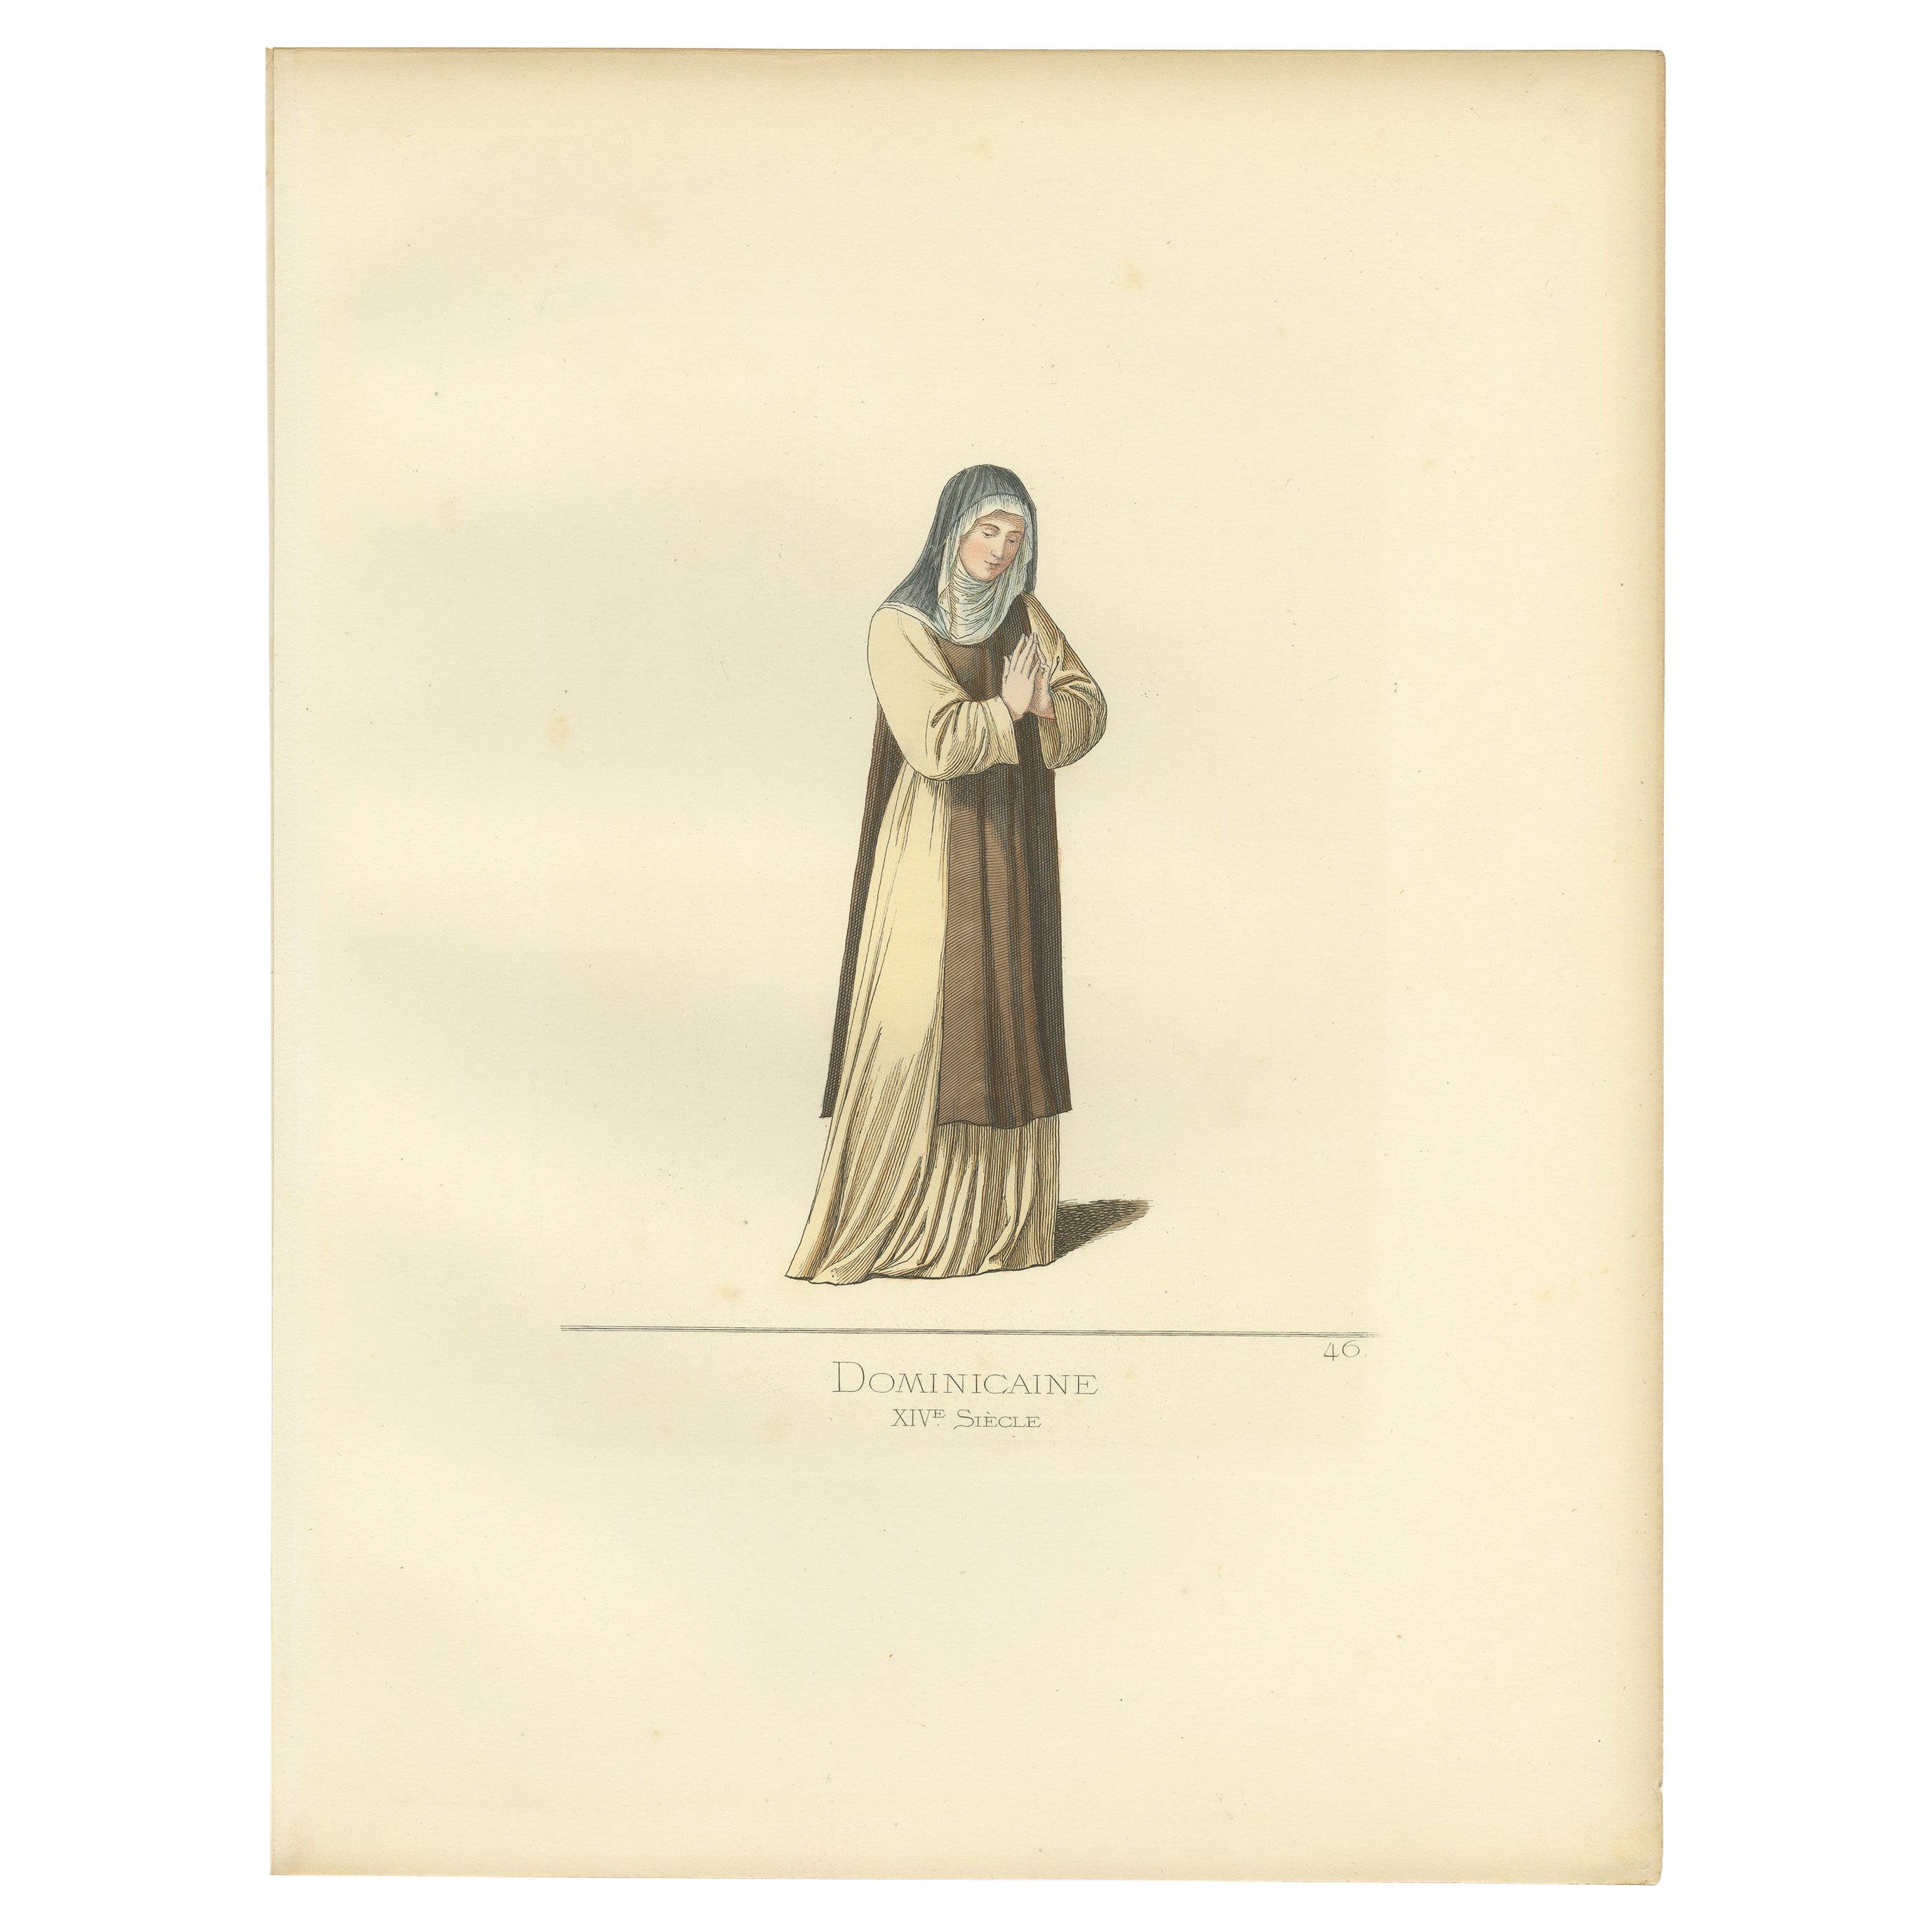 Antique Print of a Female Member of the Dominican Order by Bonnard, 1860